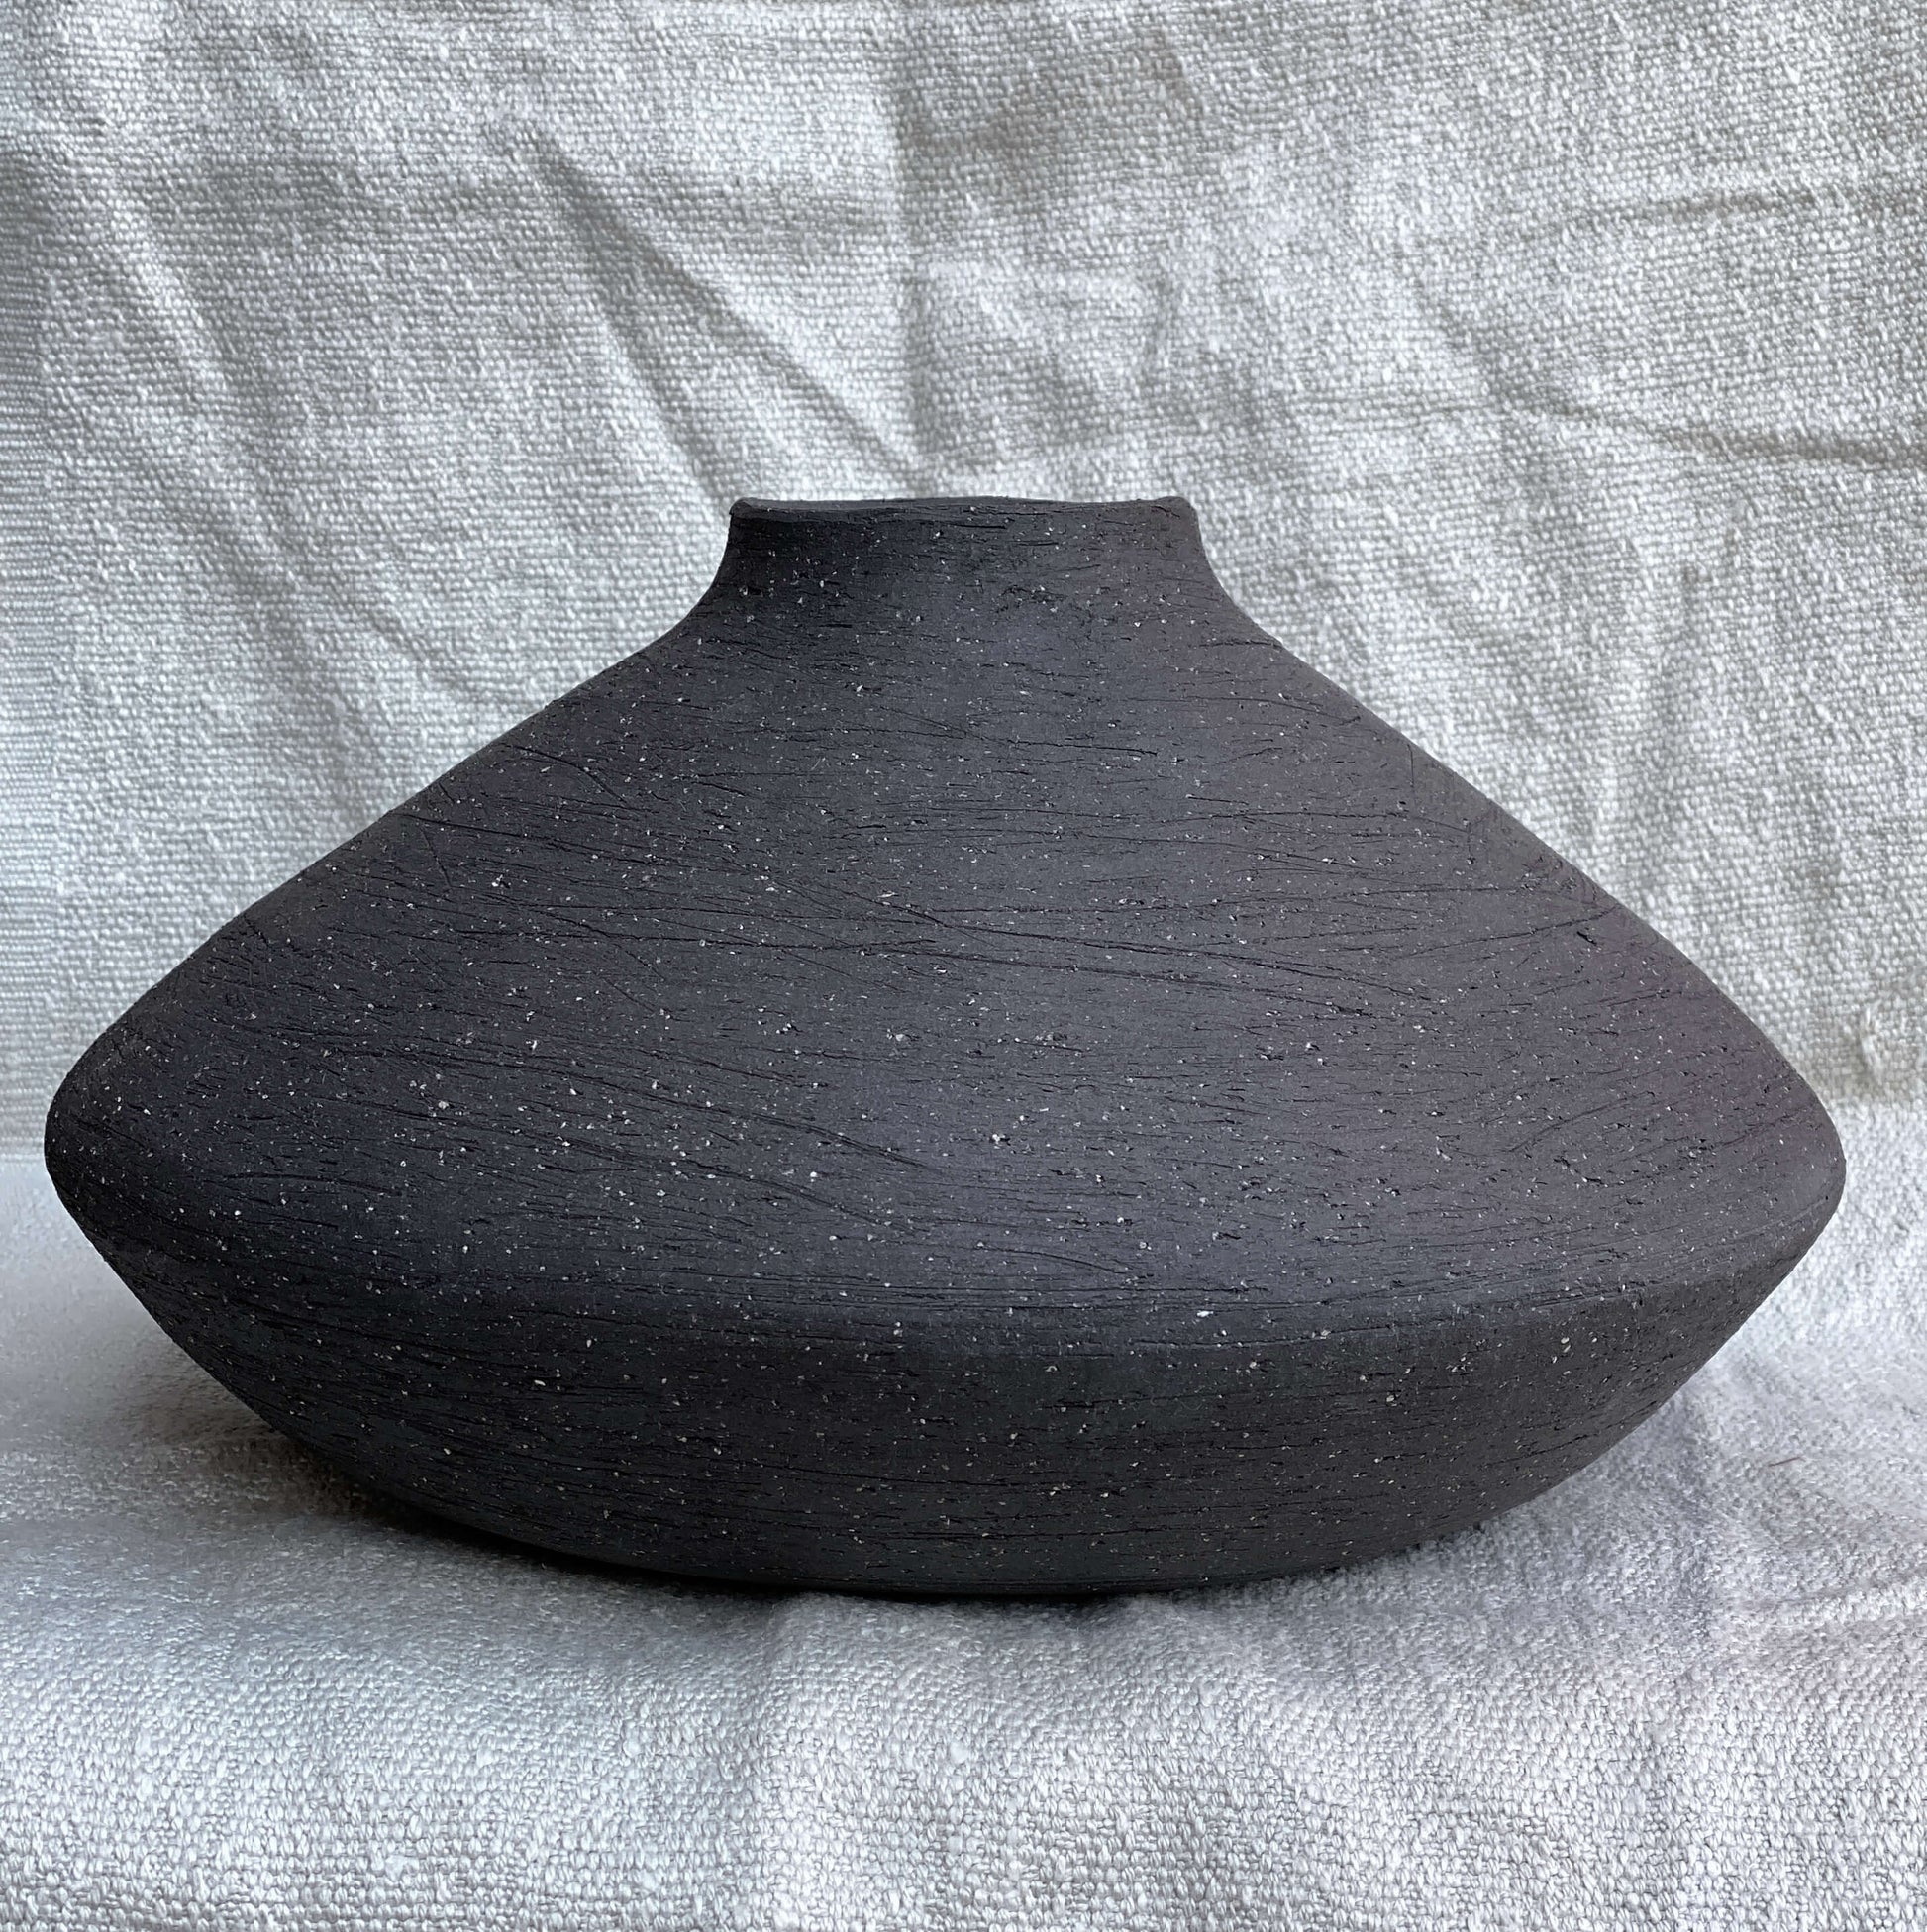 Black, wide belly ceramic decor vessel with stone texture.